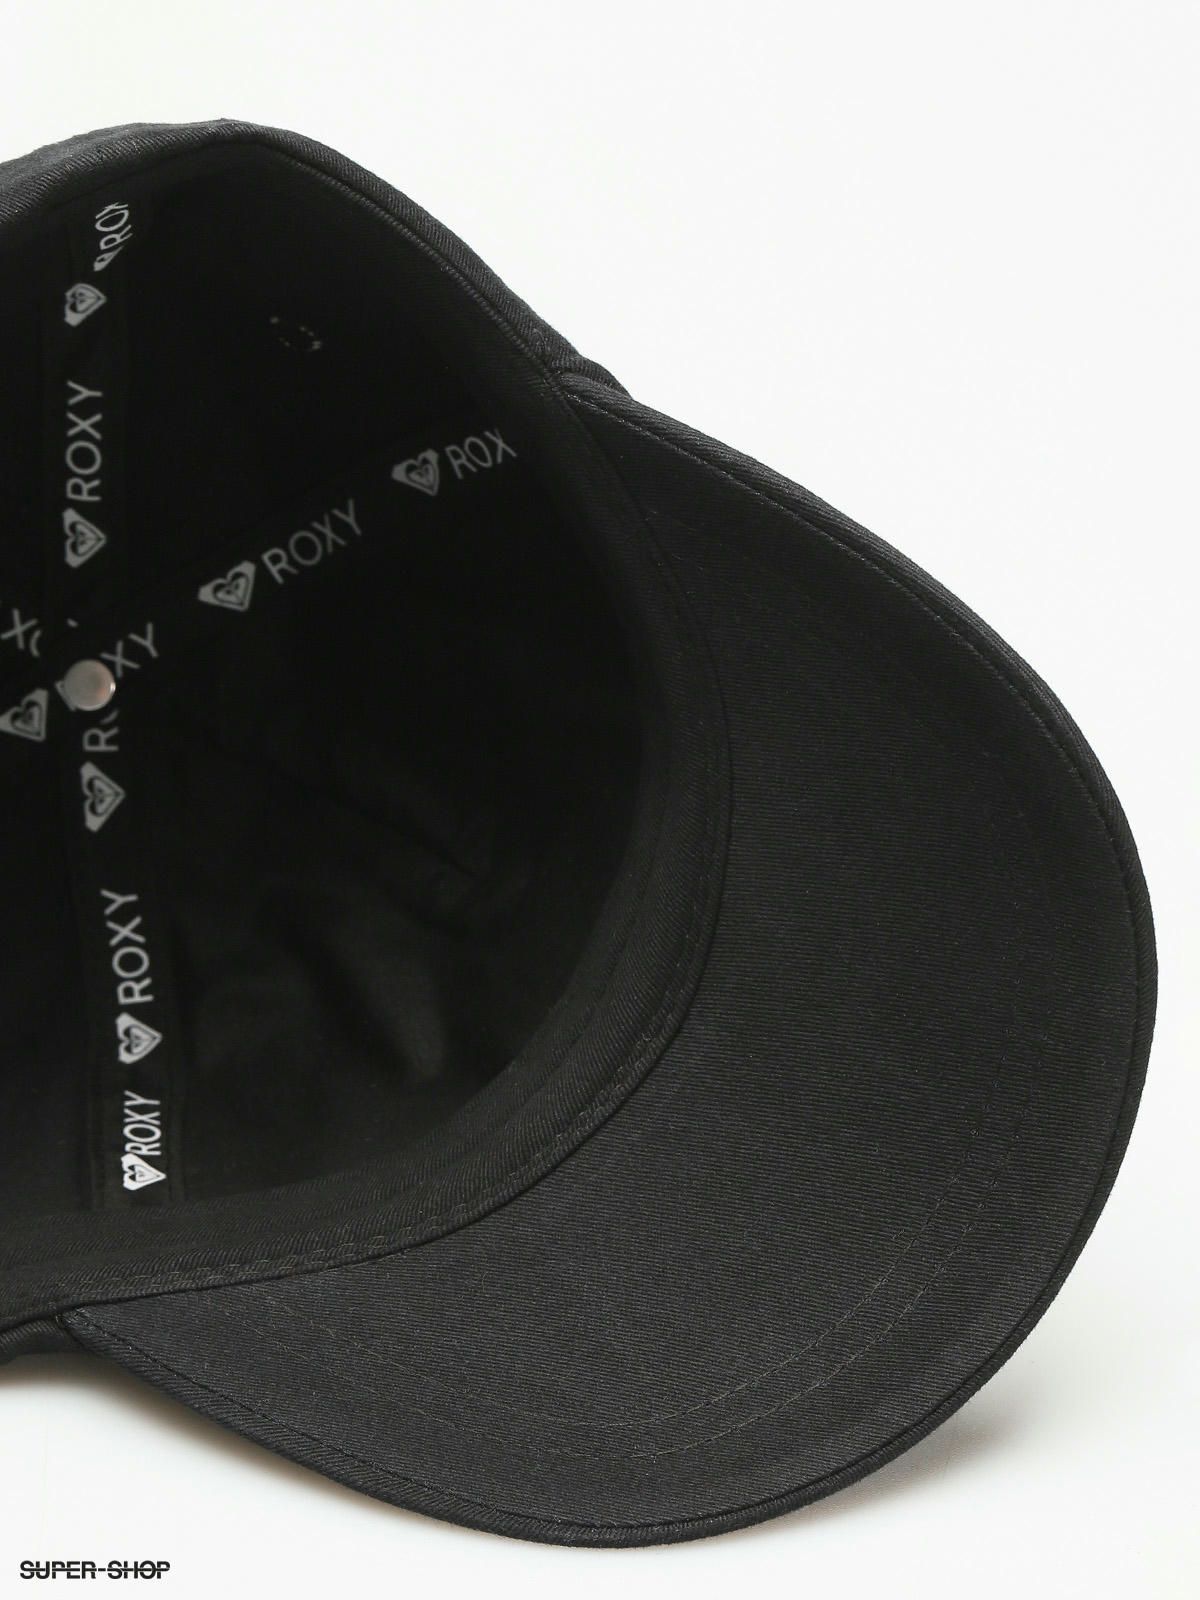 Extra Wmn Cap (anthracite) ZD Innings Roxy